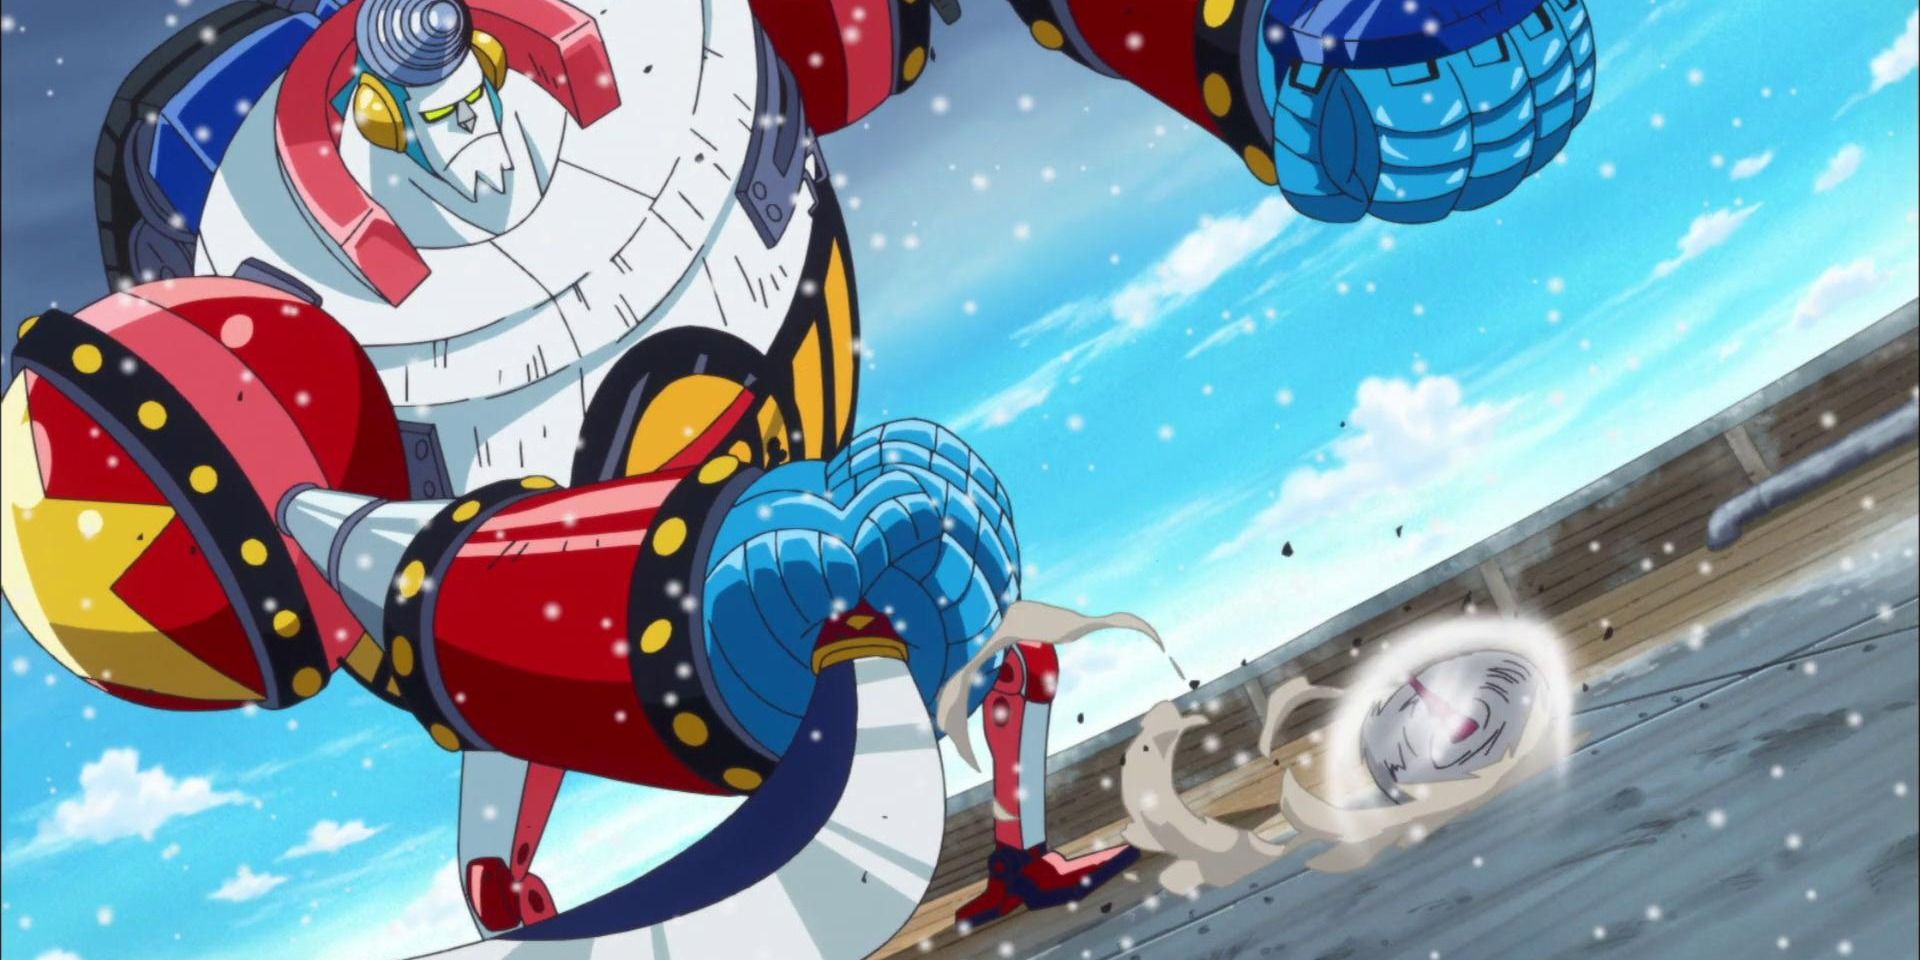 General Franky performing a sword attack in One Piece's Punk Hazard Arc